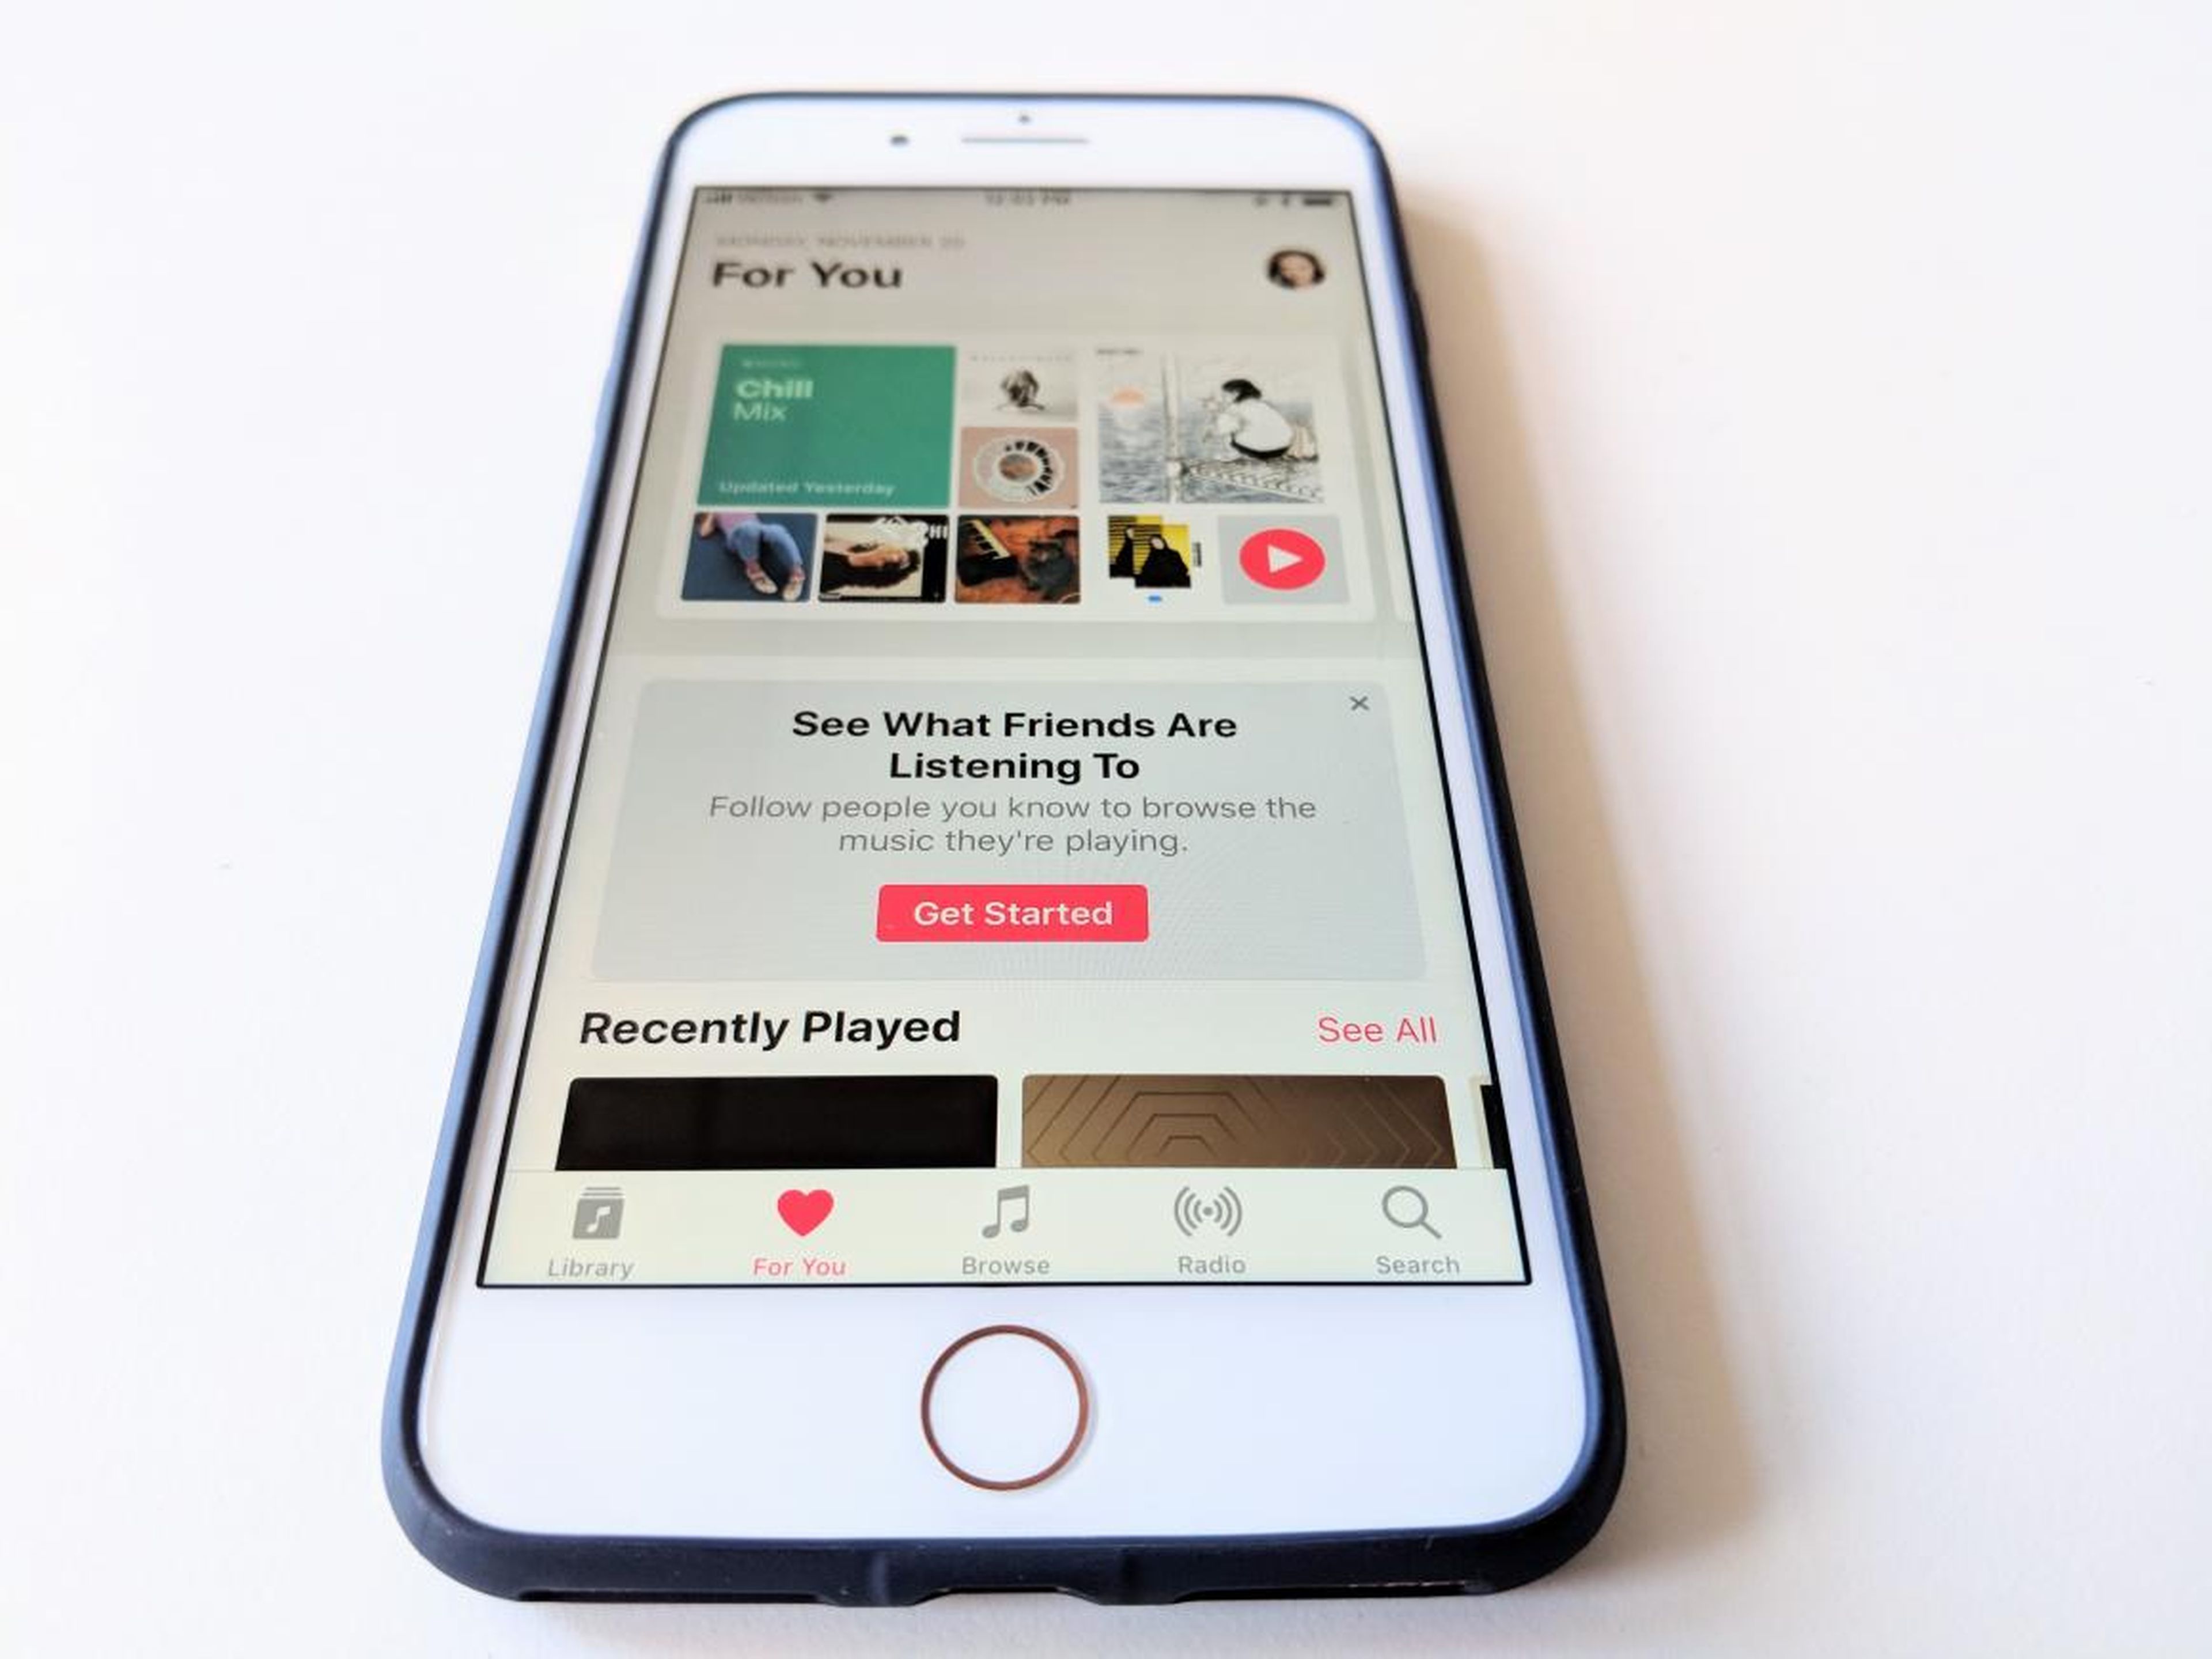 Apple has been increasingly focusing on its services business, which includes offerings such as Apple Music.